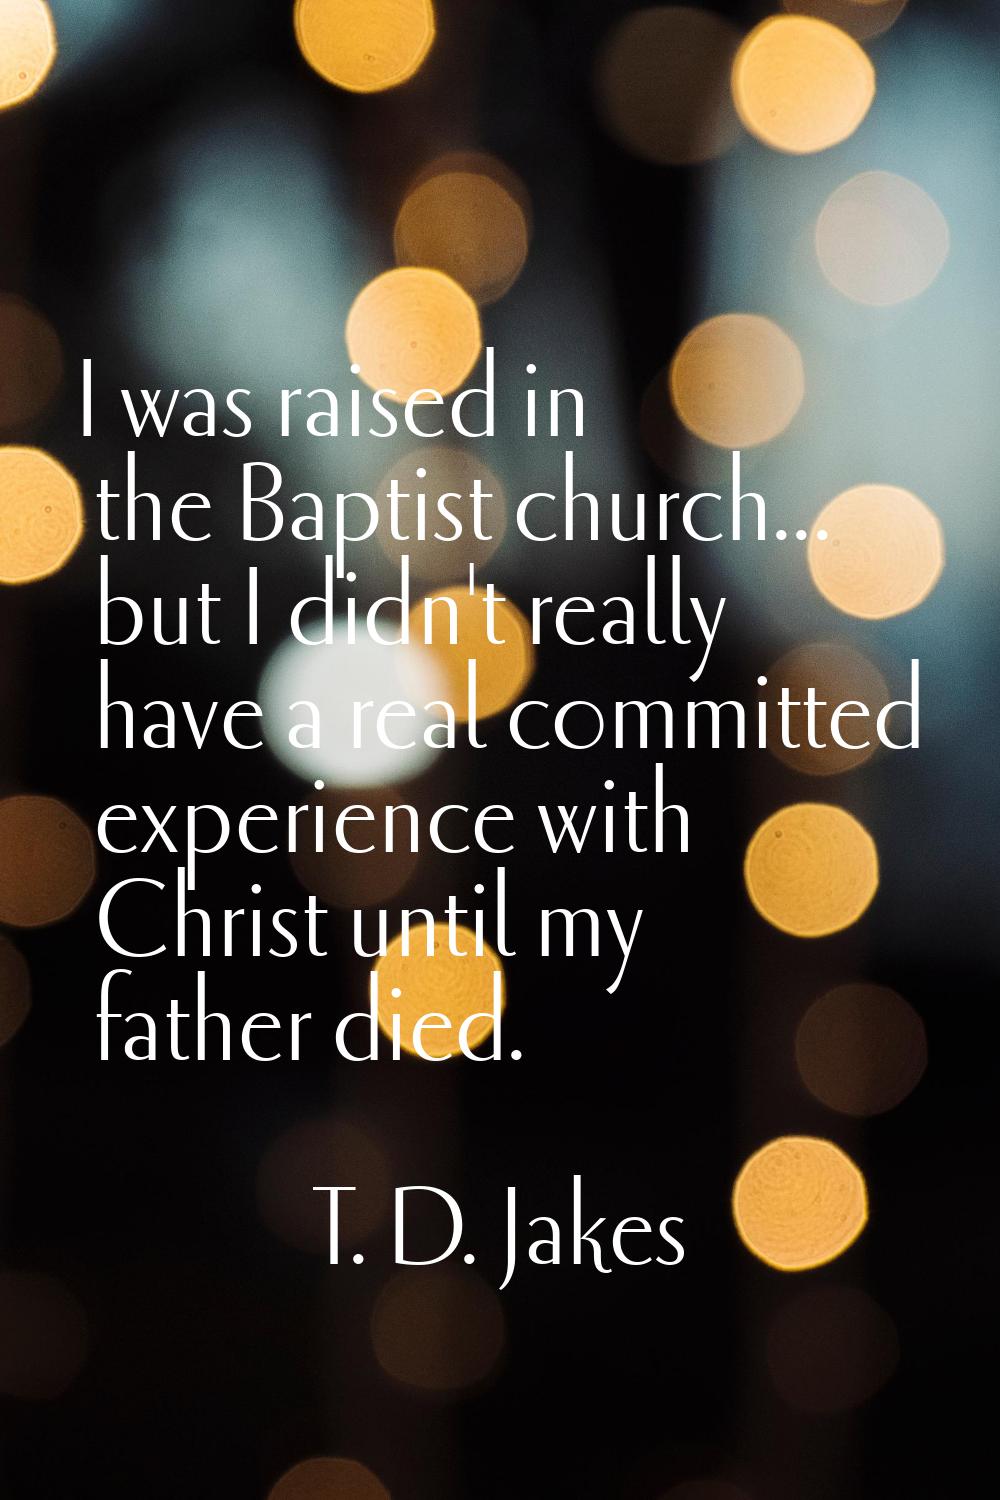 I was raised in the Baptist church... but I didn't really have a real committed experience with Chr